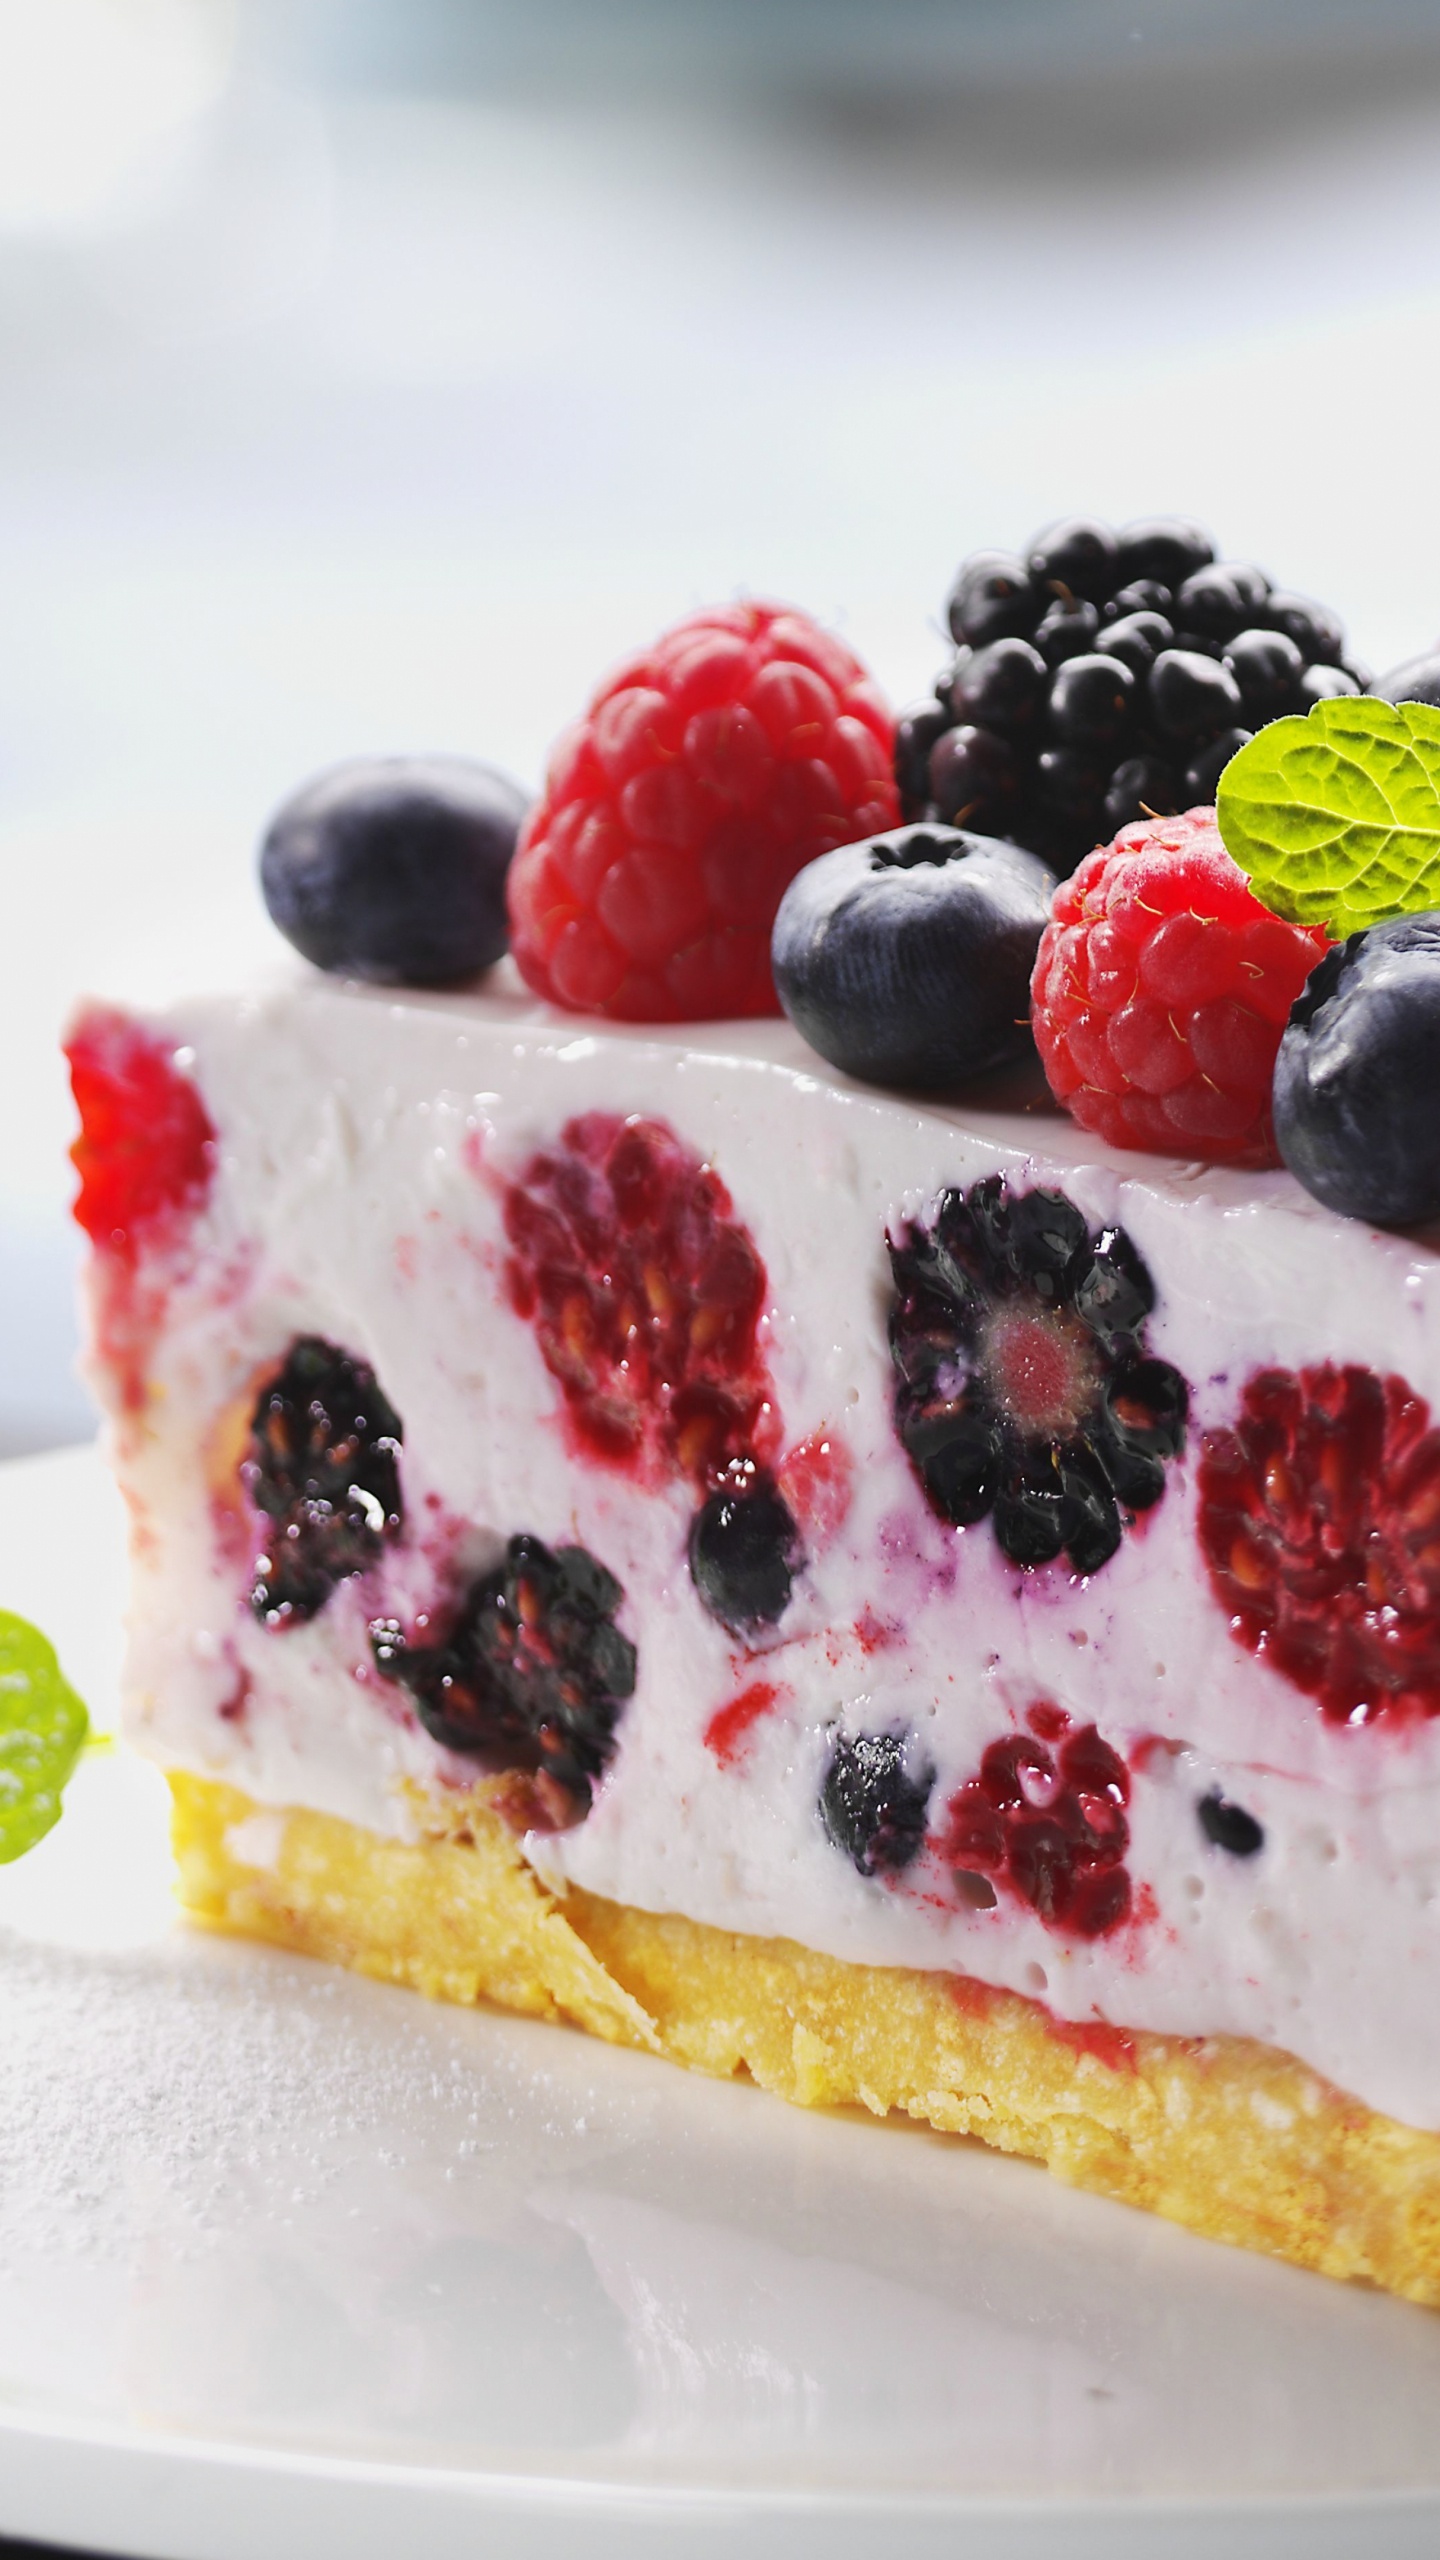 White and Red Cake With Raspberry on Top. Wallpaper in 1440x2560 Resolution